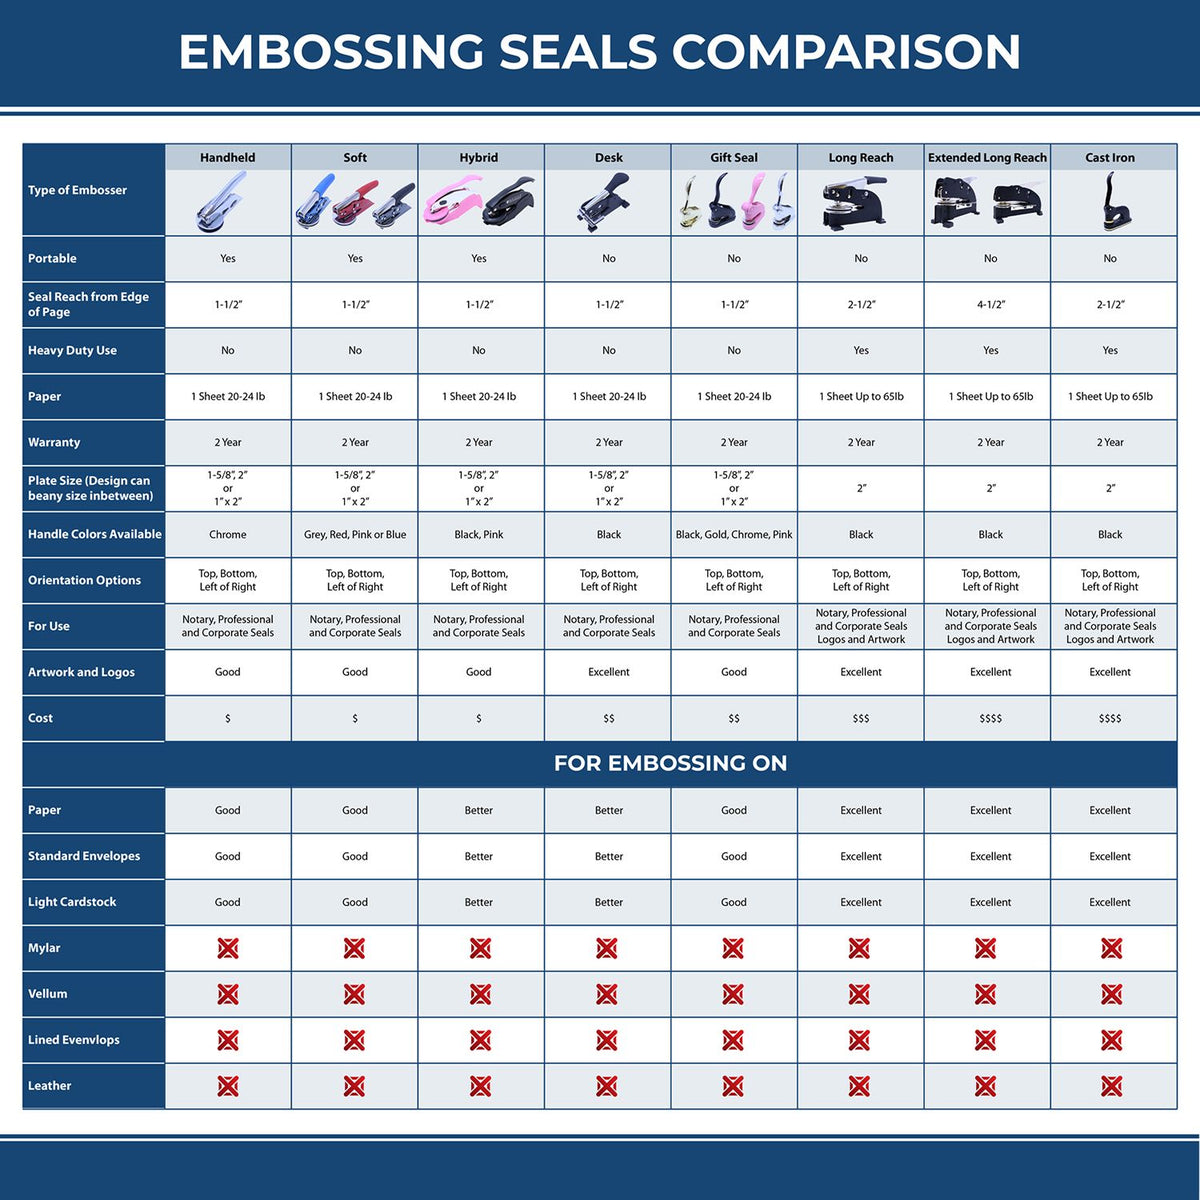 A comparison chart for the different types of mount models available for the Handheld Kentucky Professional Engineer Embosser.